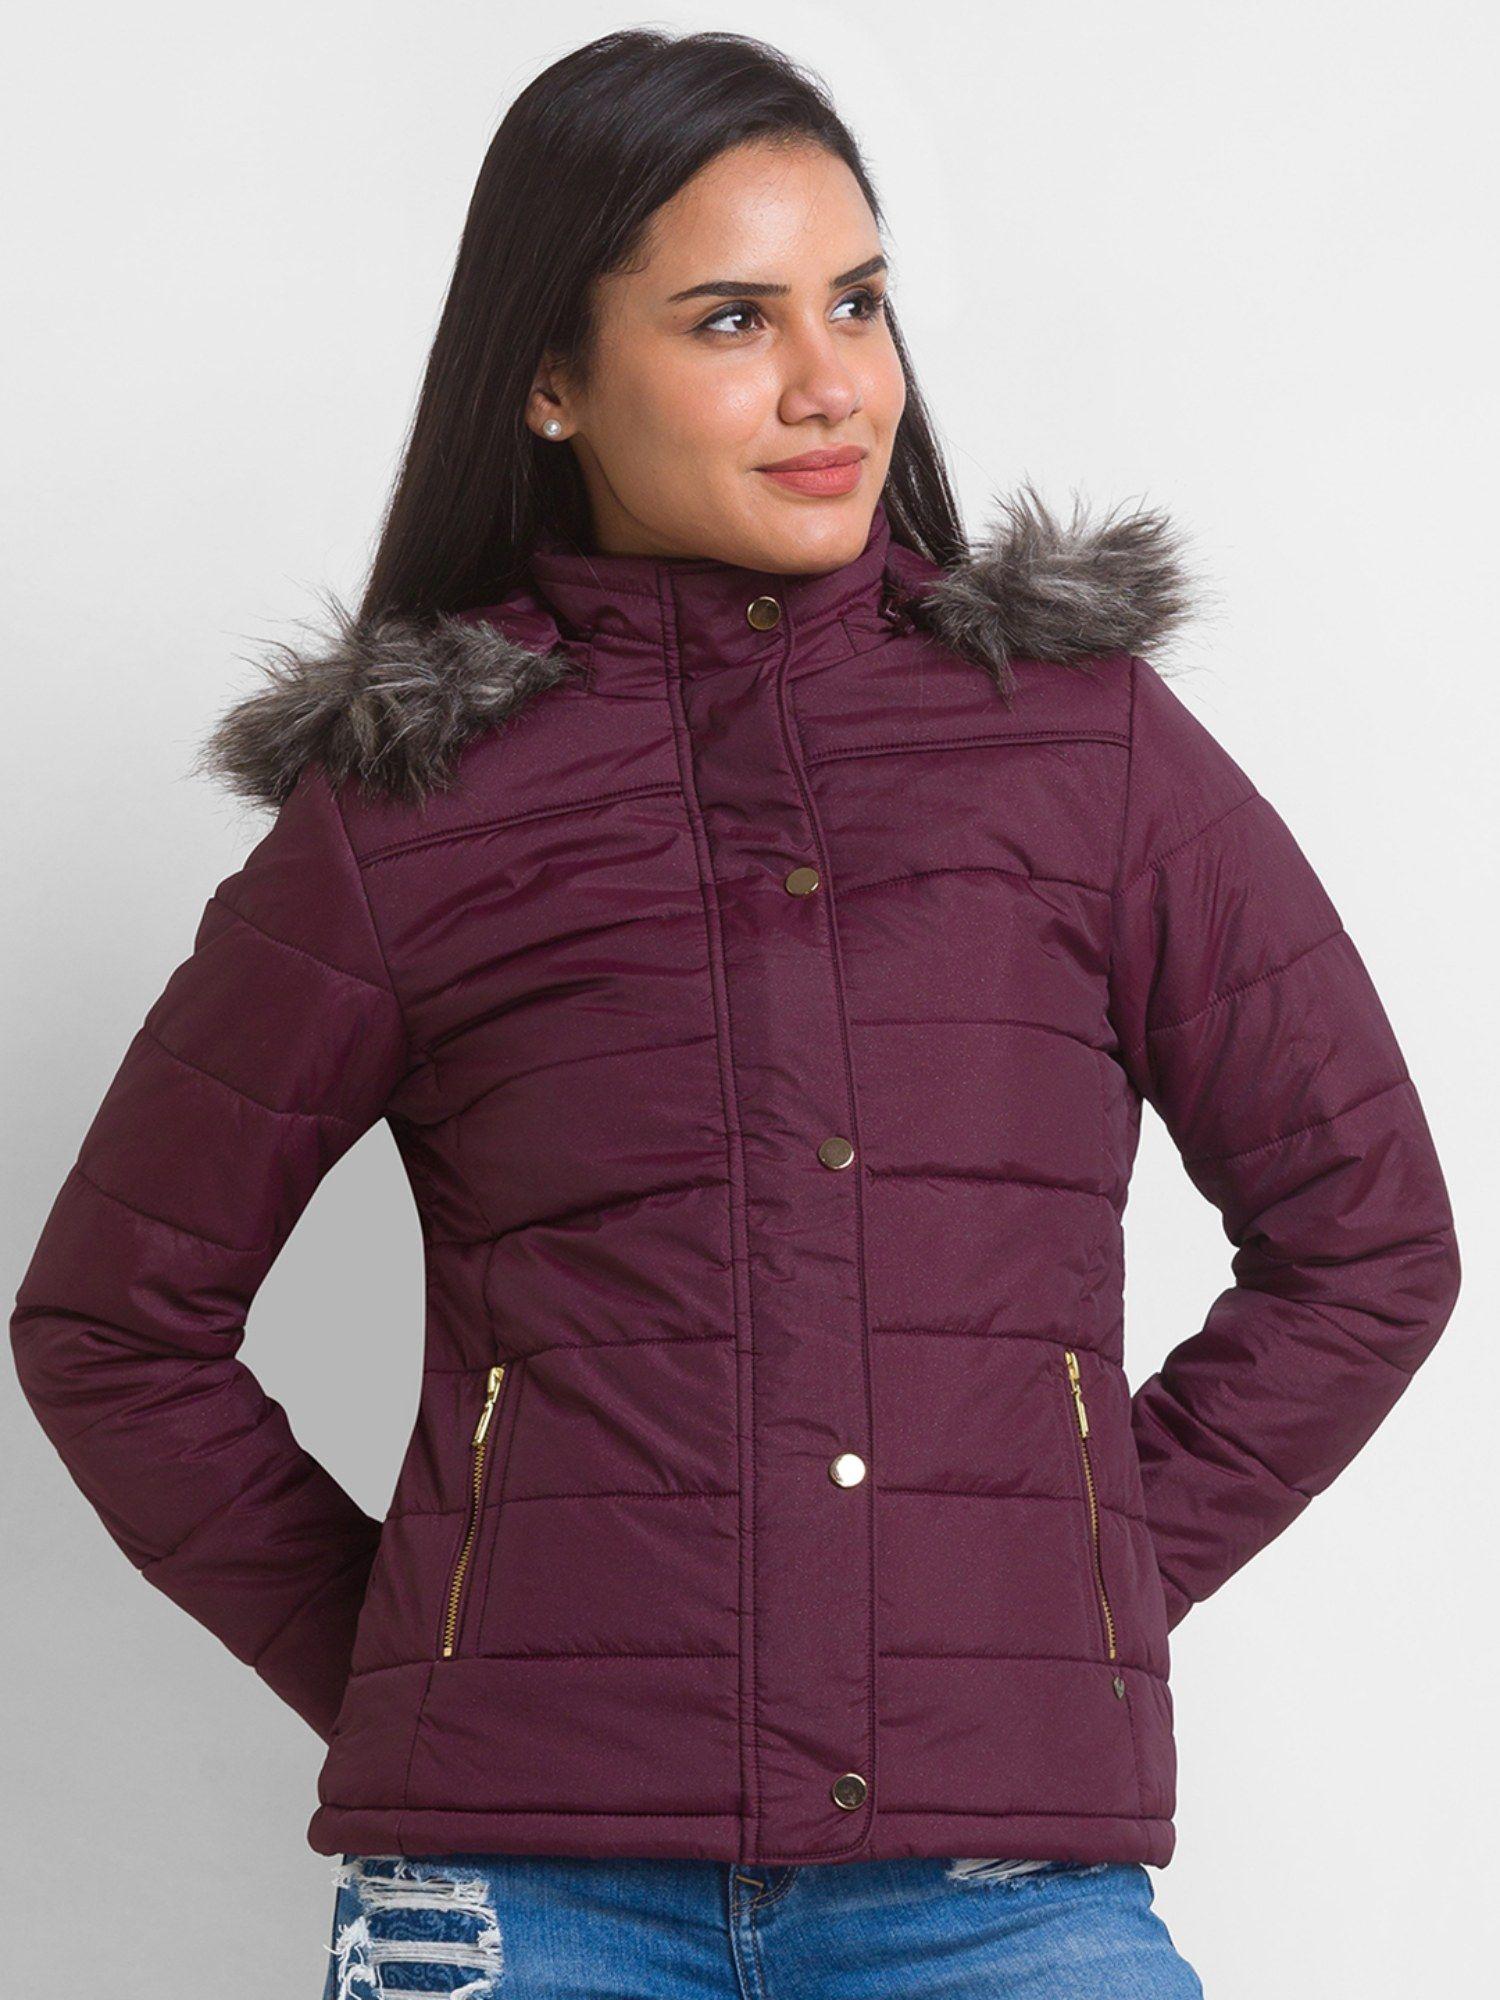 wine polyester full sleeve casual jacket for women